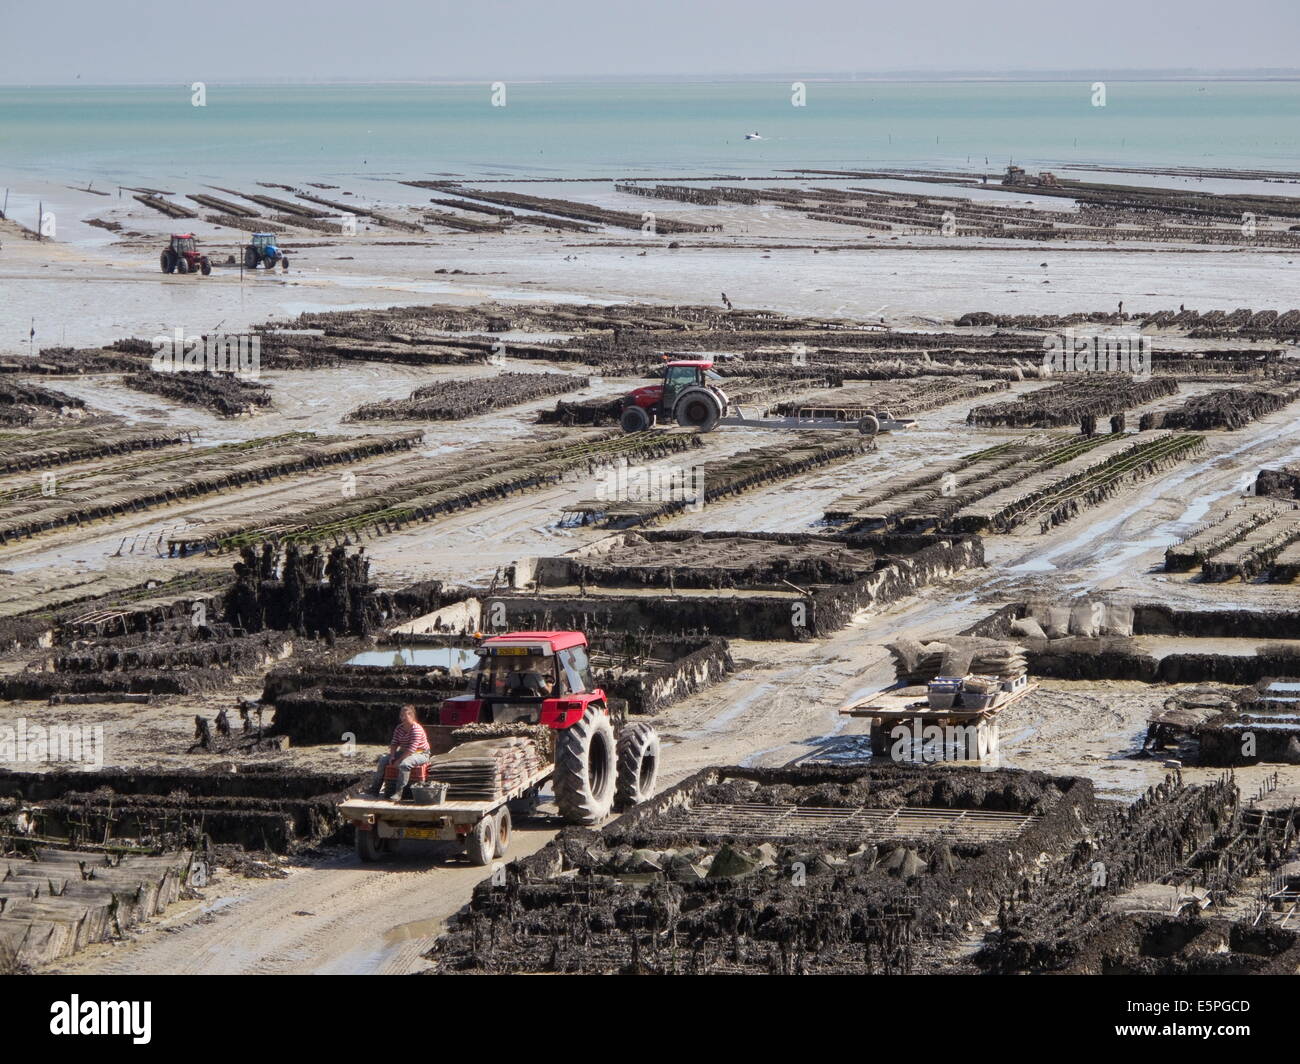 Oyster beds at low tide with tractors and harvesters, Cancale, Brittany, France, Europe Stock Photo